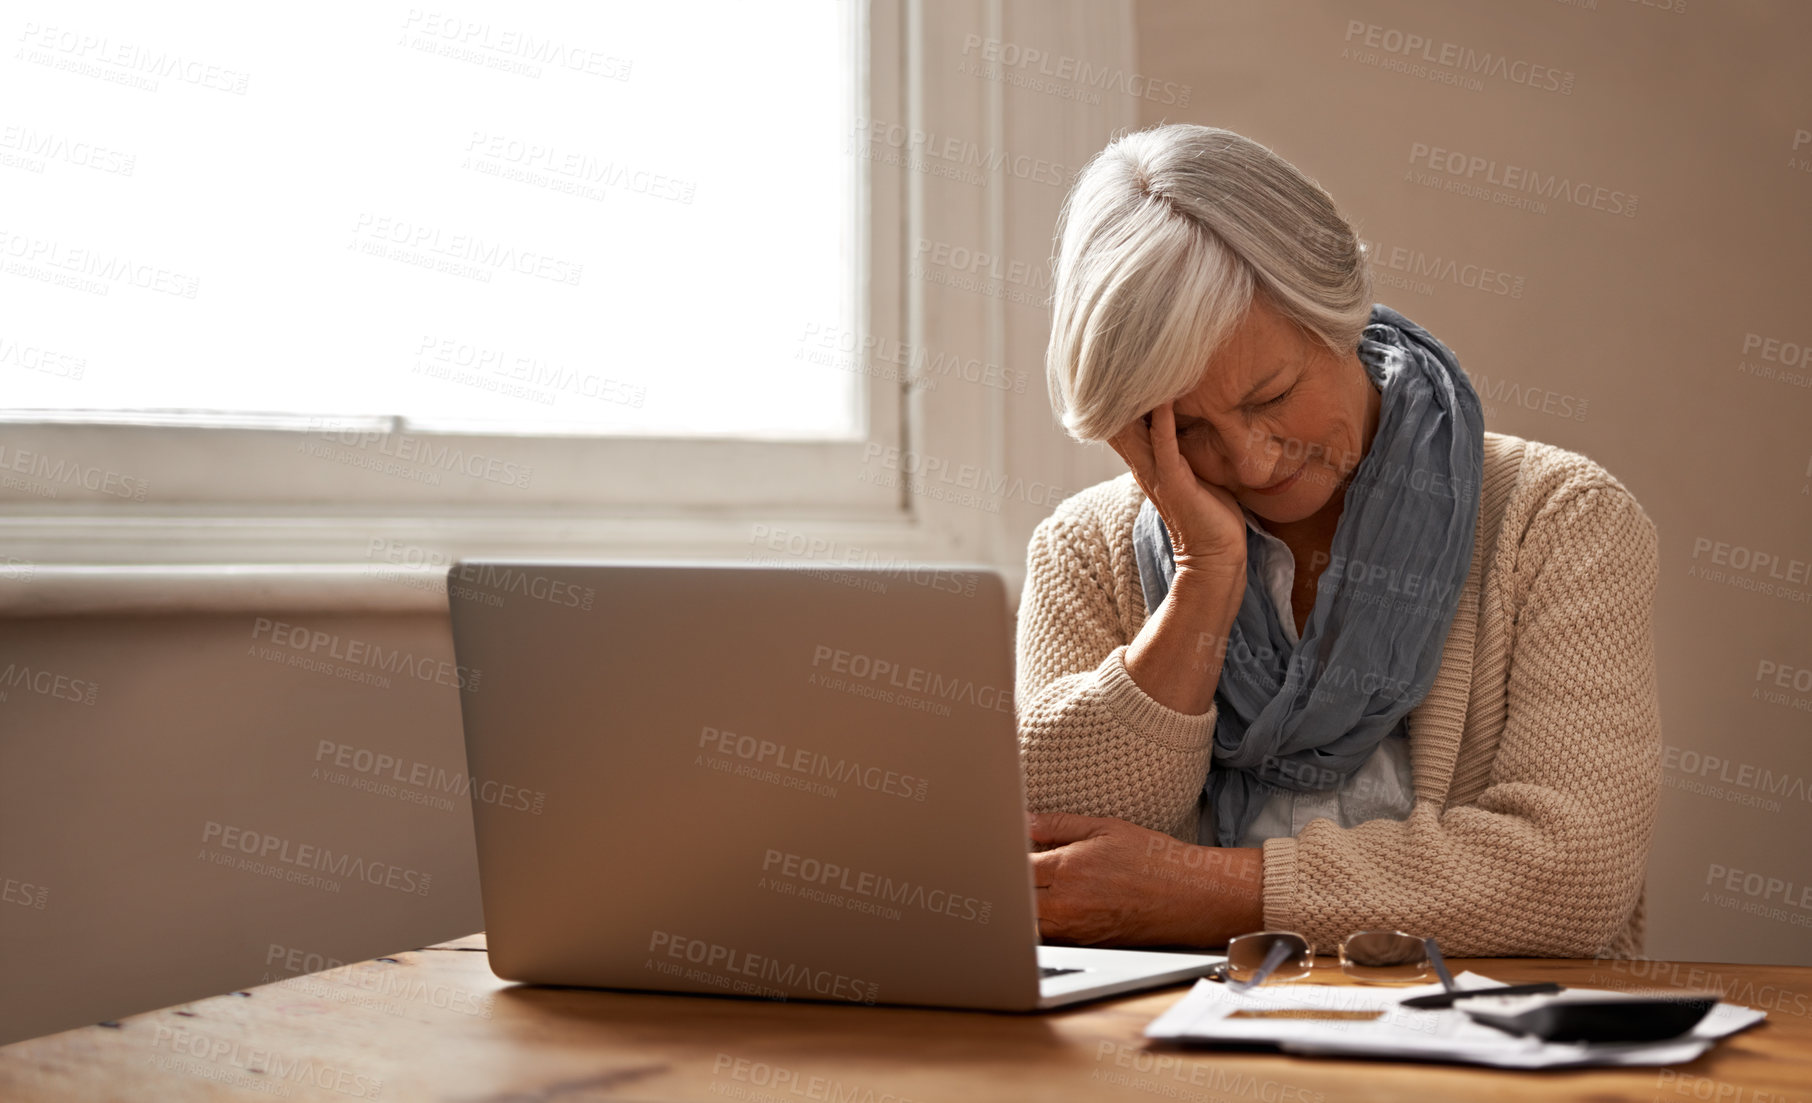 Buy stock photo An elederly woman sitting in front of her laptop looking stressed and worried